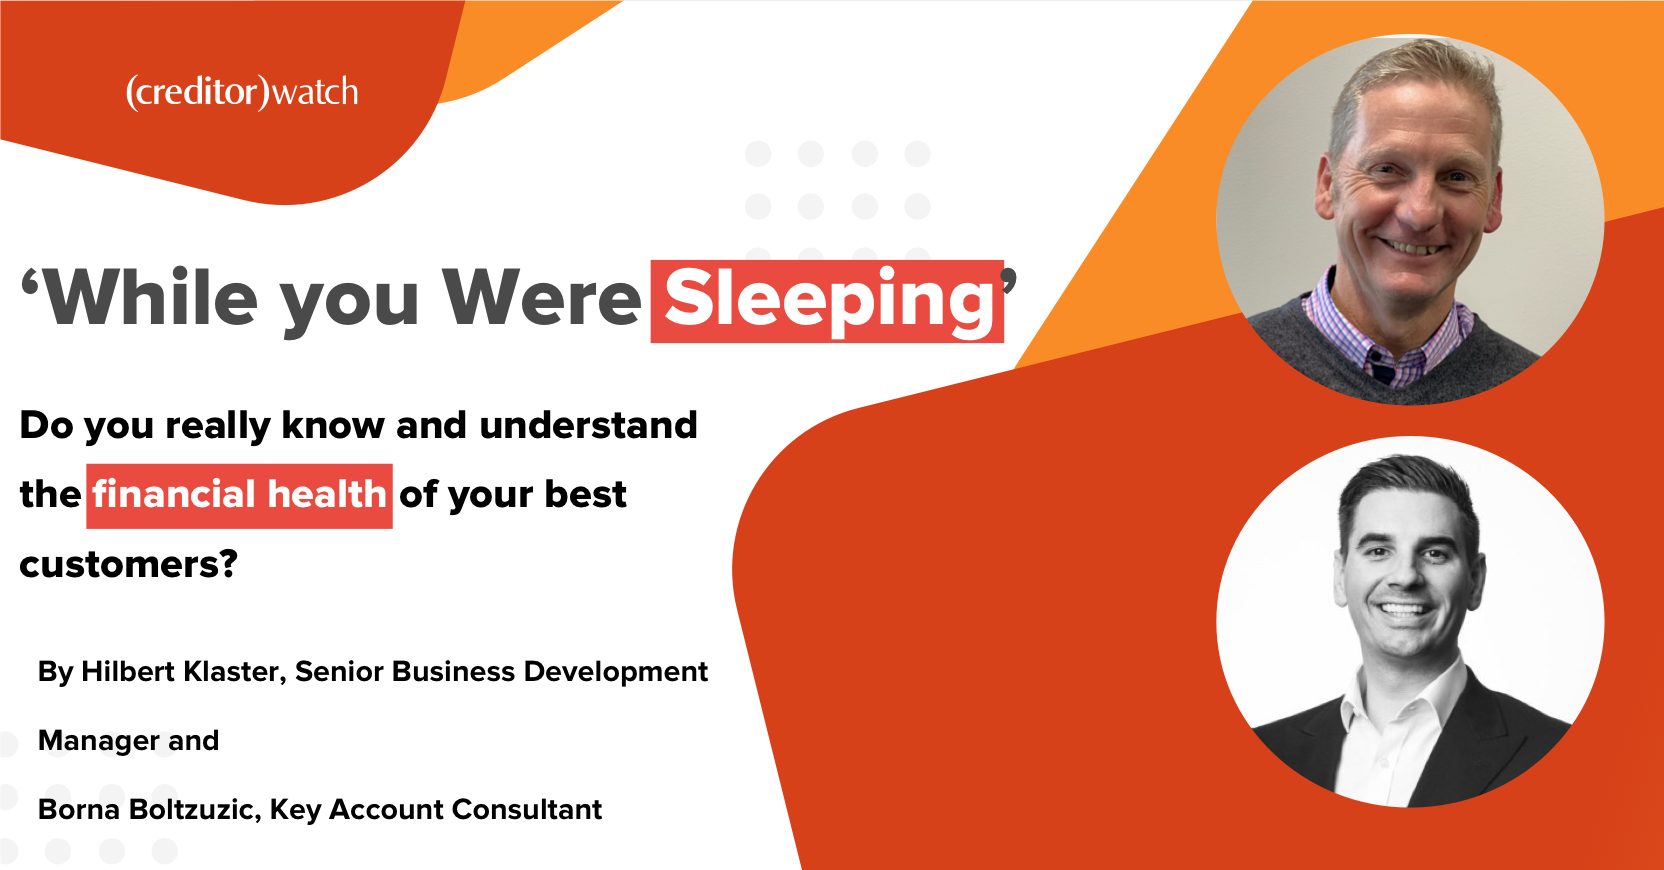 'While you were sleeping' - Do you really know and understand the financial health of your best customers?